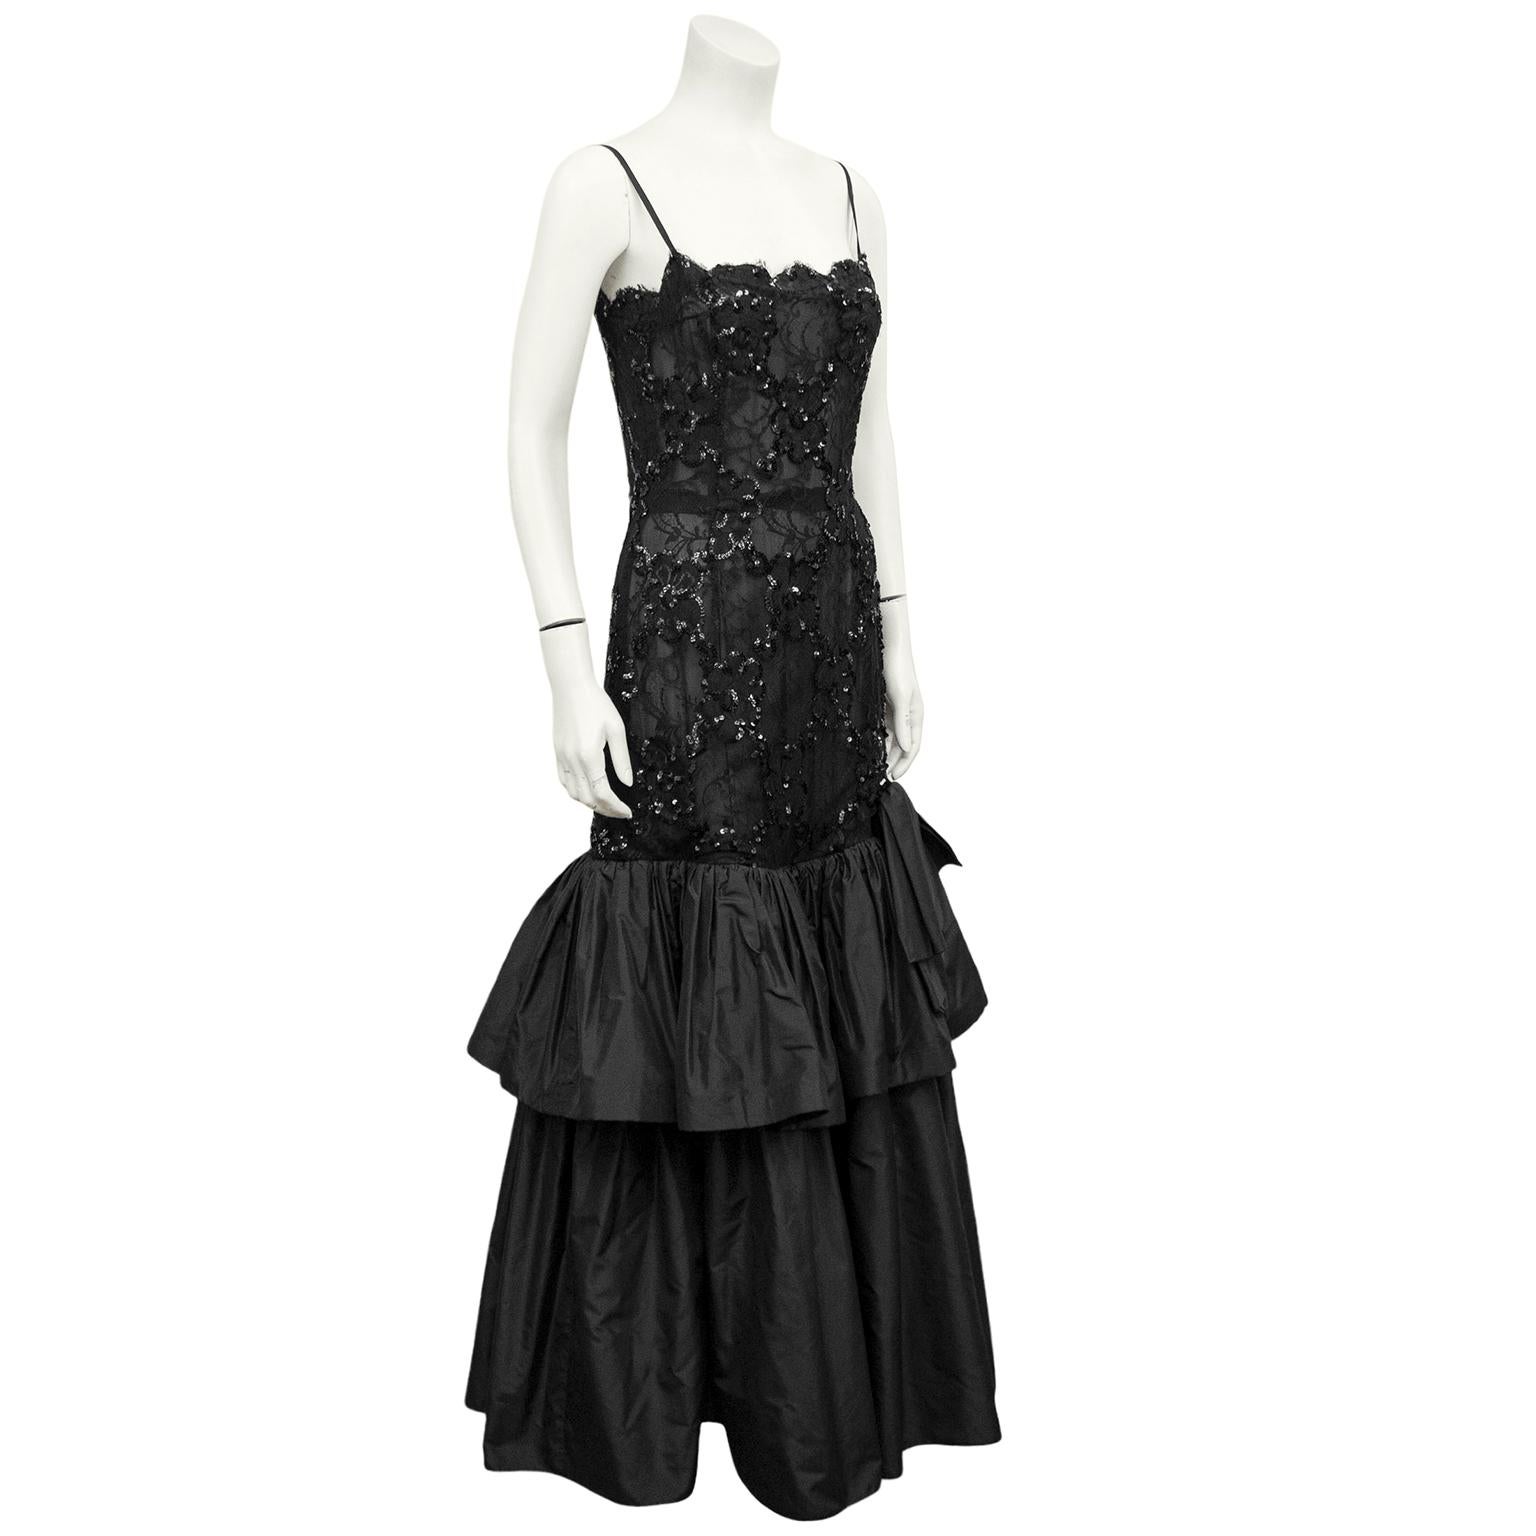 1980s Raffaella Curiel evening gown. Semi-sheer black lace drop waist bodice, embellished with sequins. Tiered black silk taffeta skirt with bow detail. Invisible zipper closure up centre back. Excellent vintage condition. Marked IT 44, fits like a